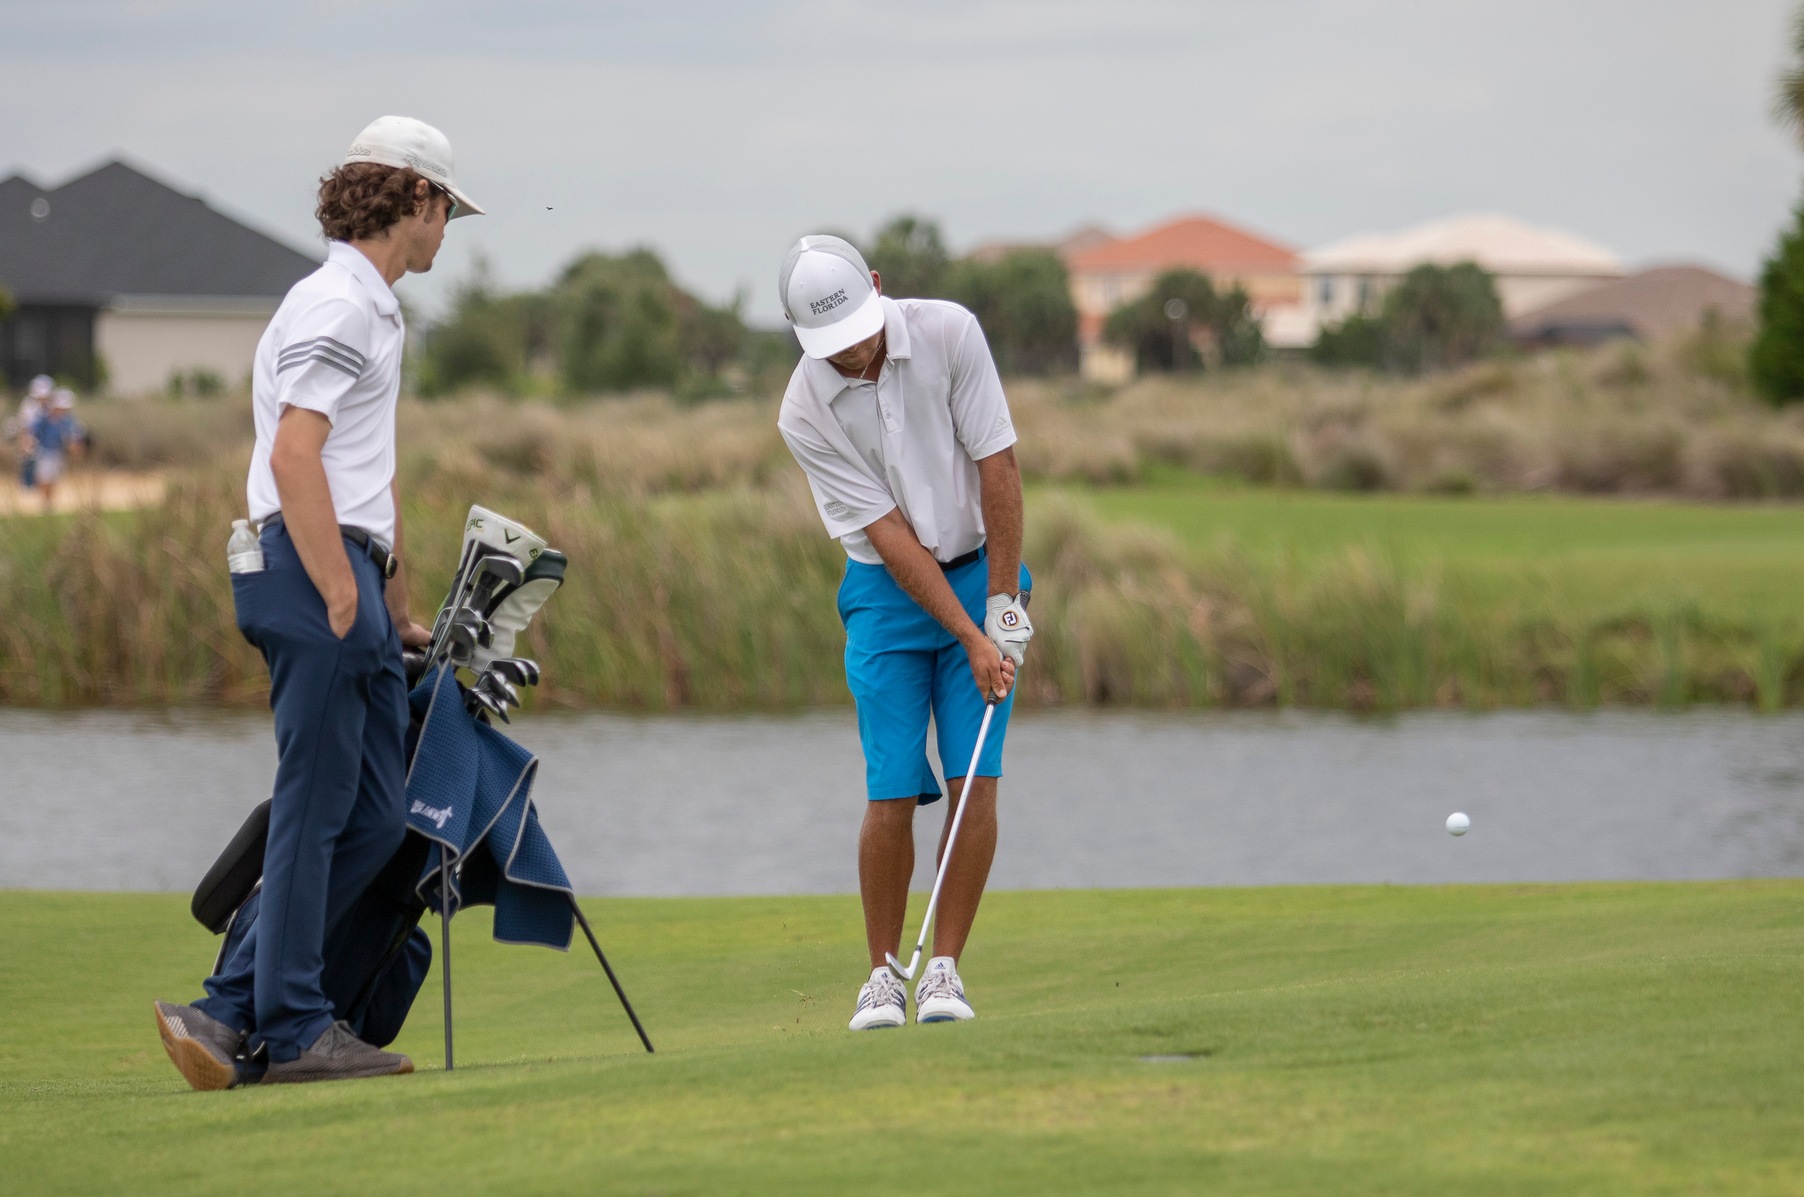 Men's golf team in fifth place after two rounds at national tournament